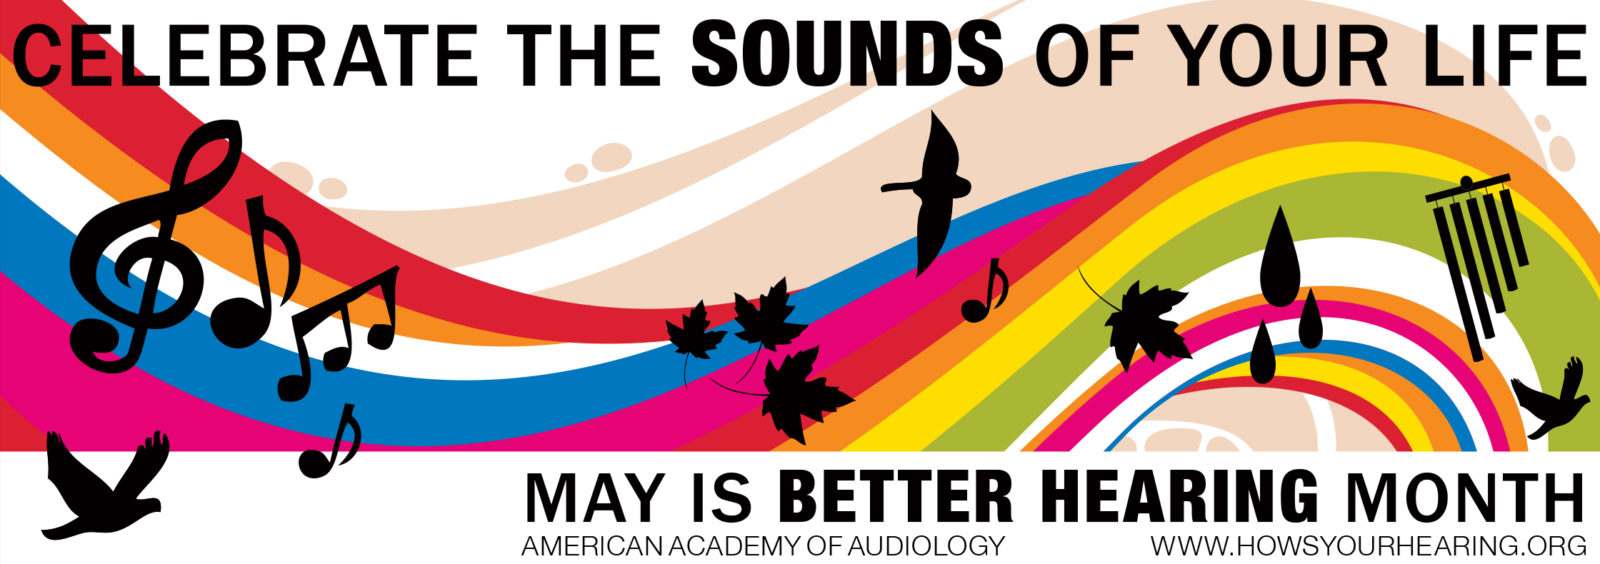 Graphic picture of a wavy rainbow music staff with black music note, birds, rain drops, and leaves dancing to the music. Caption reads, Celebrate the sounds of your life. May is better hearing month. For more information go to www dot howsyourhearing dot org